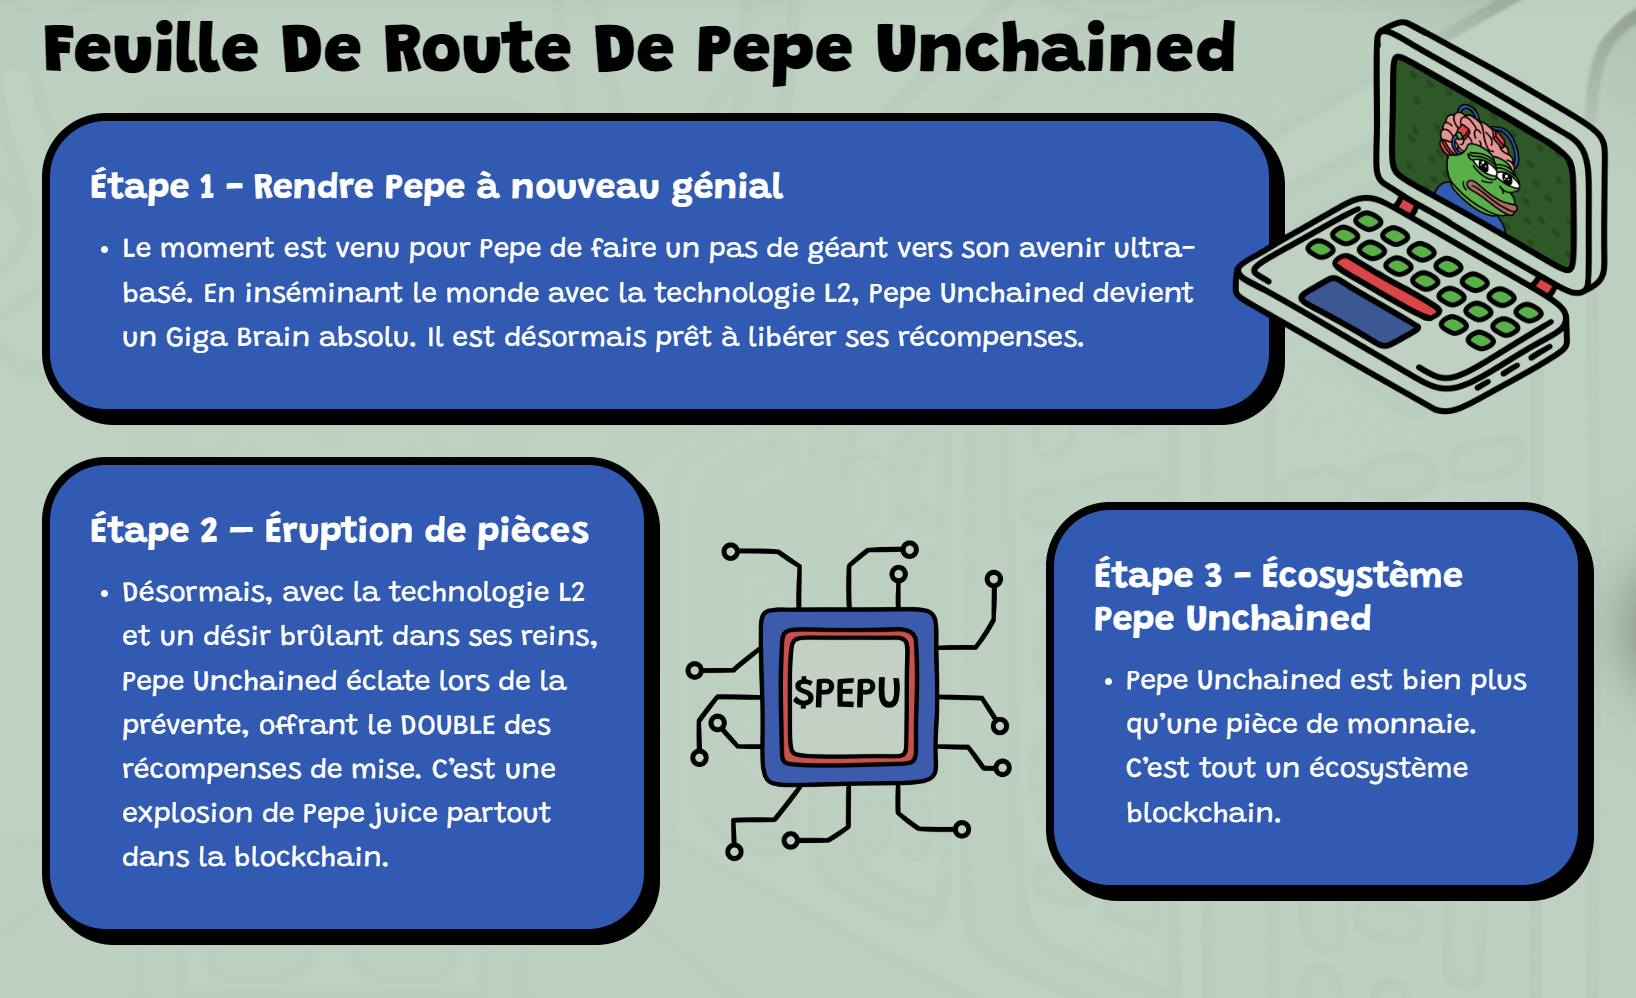 Pepe Unchained Feuille de route